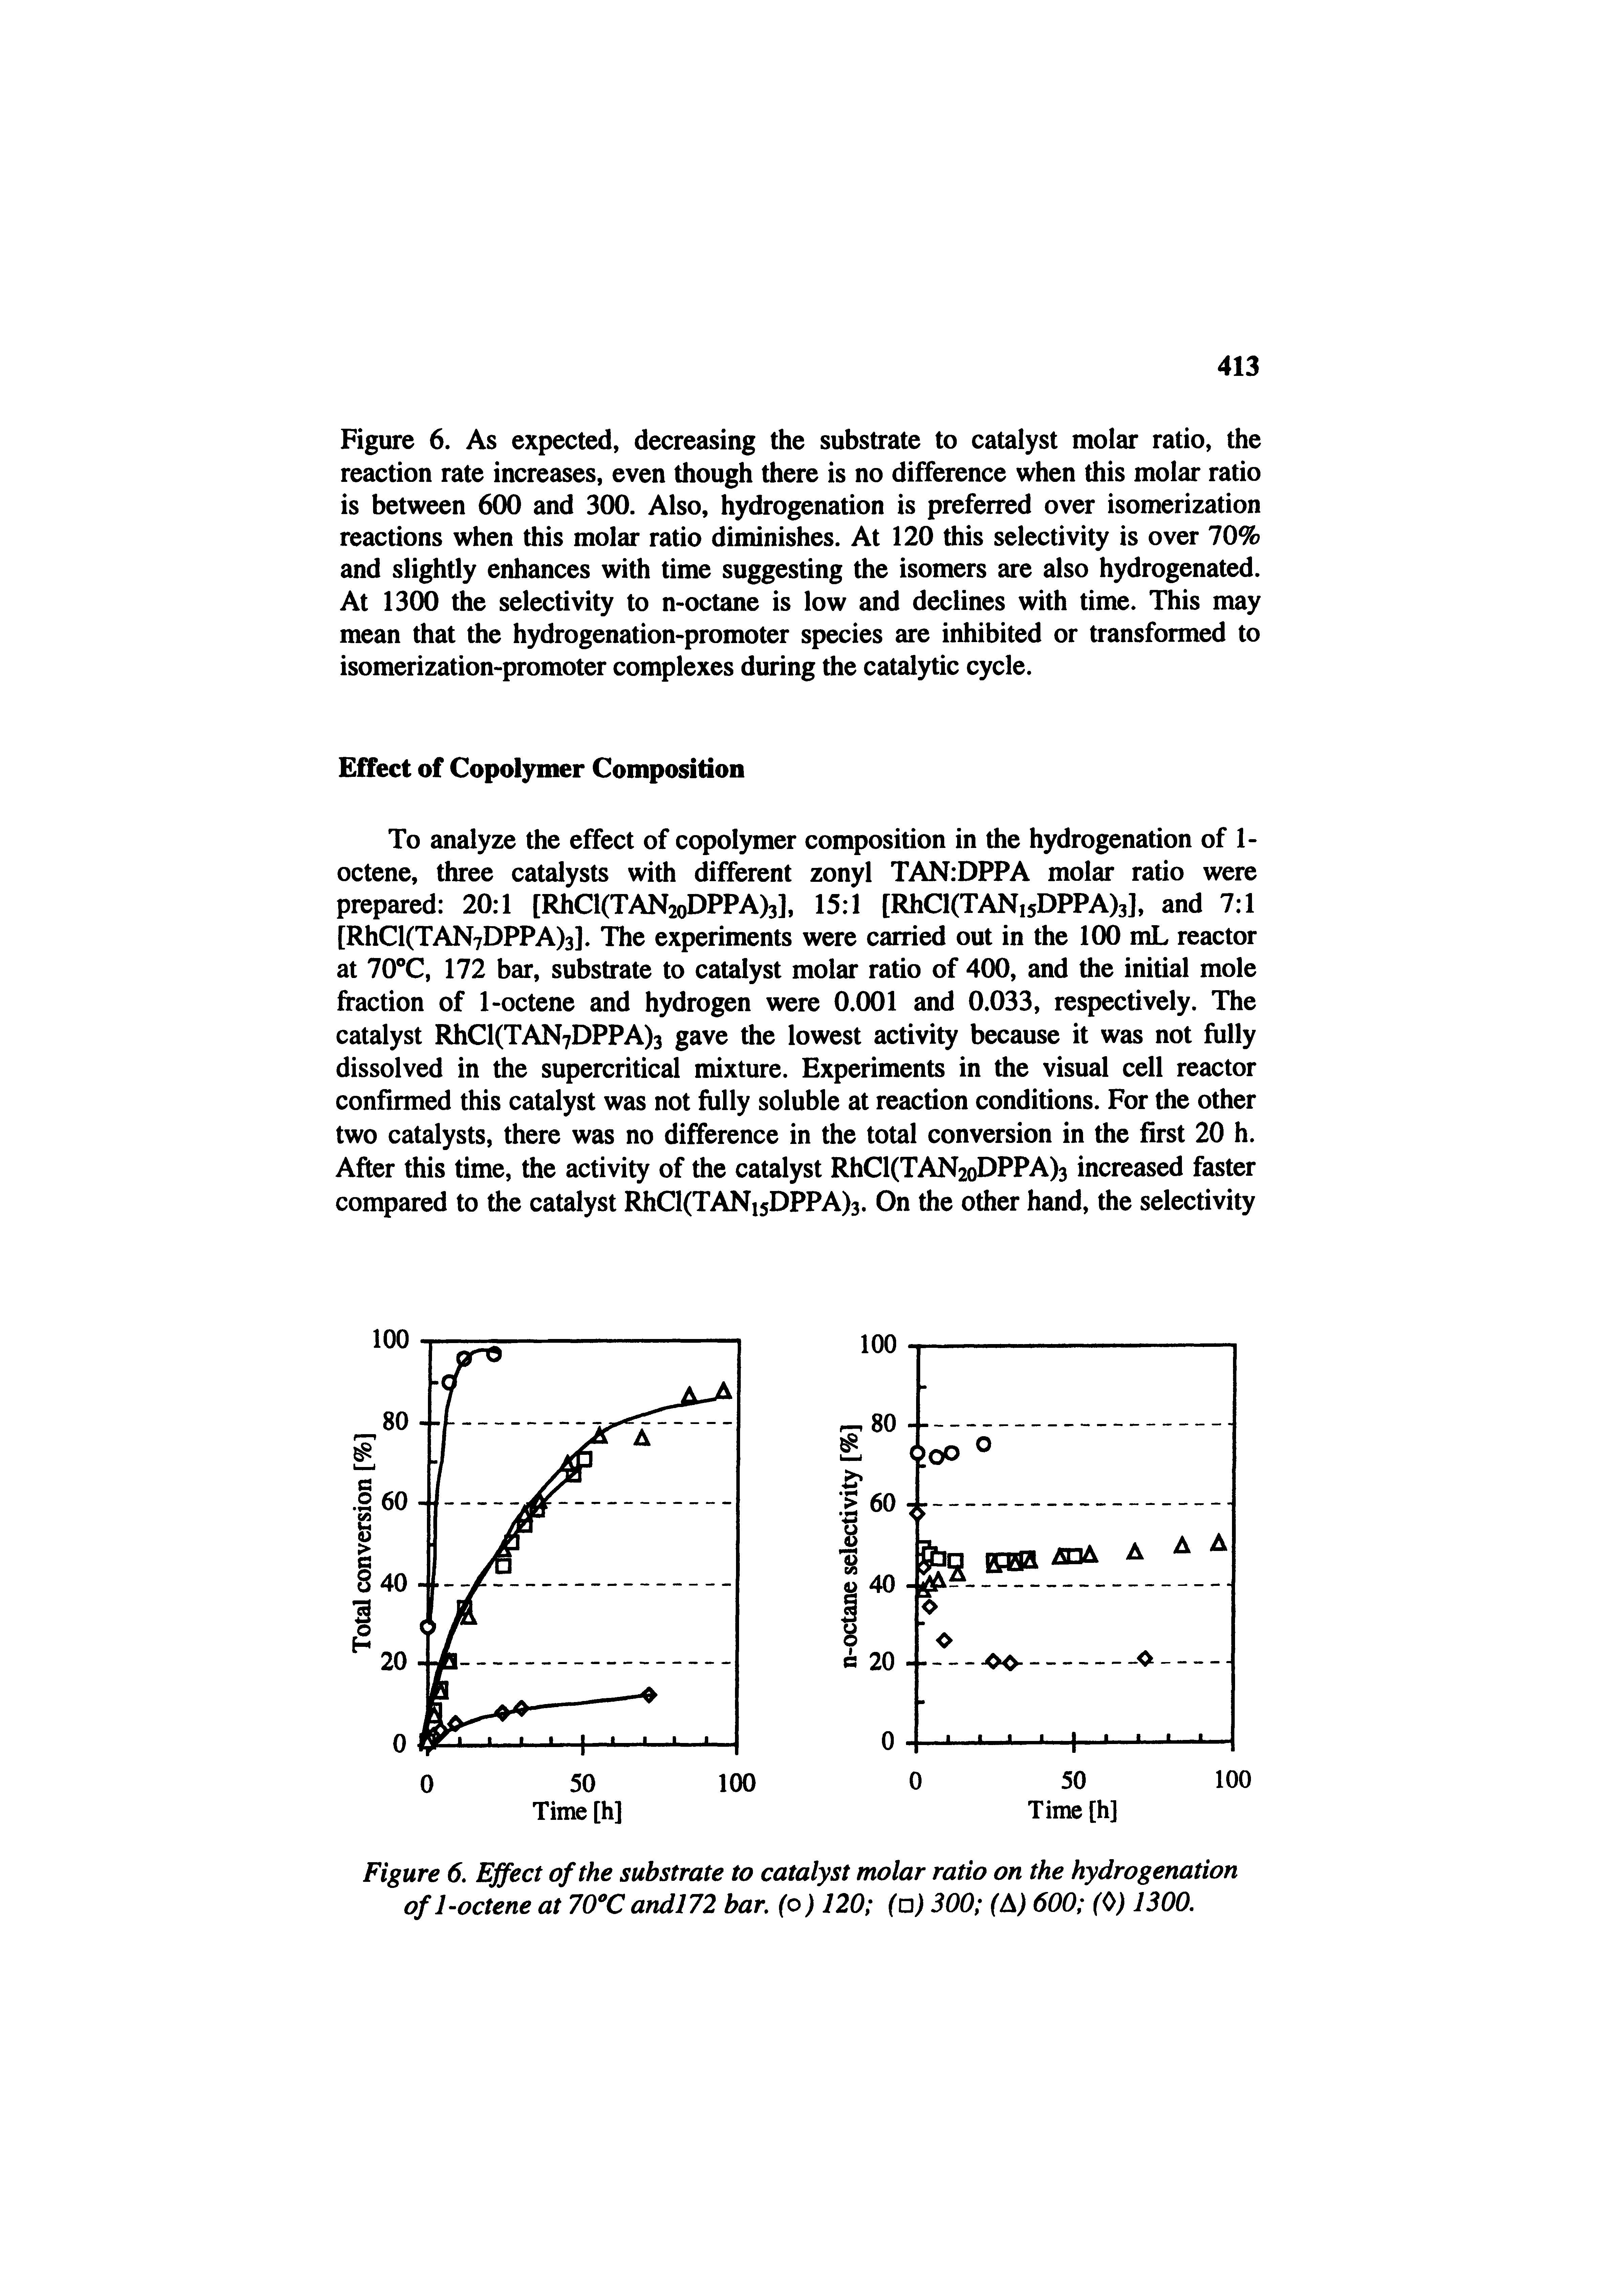 Figure 6. As expected, decreasing the substrate to catalyst molar ratio, the reaction rate increases, even though there is no difference when this molar ratio is between 600 and 300. Also, hydrogenation is preferred over isomerization reactions when this molar ratio diminishes. At 120 this selectivity is over 70% and slightly enhances with time suggesting the isomers are also hydrogenated. At 1300 the selectivity to n-octane is low and declines with time. This may mean that the hydrogenation-promoter species are inhibited or transformed to isomerization-promoter complexes during the catalytic cycle.